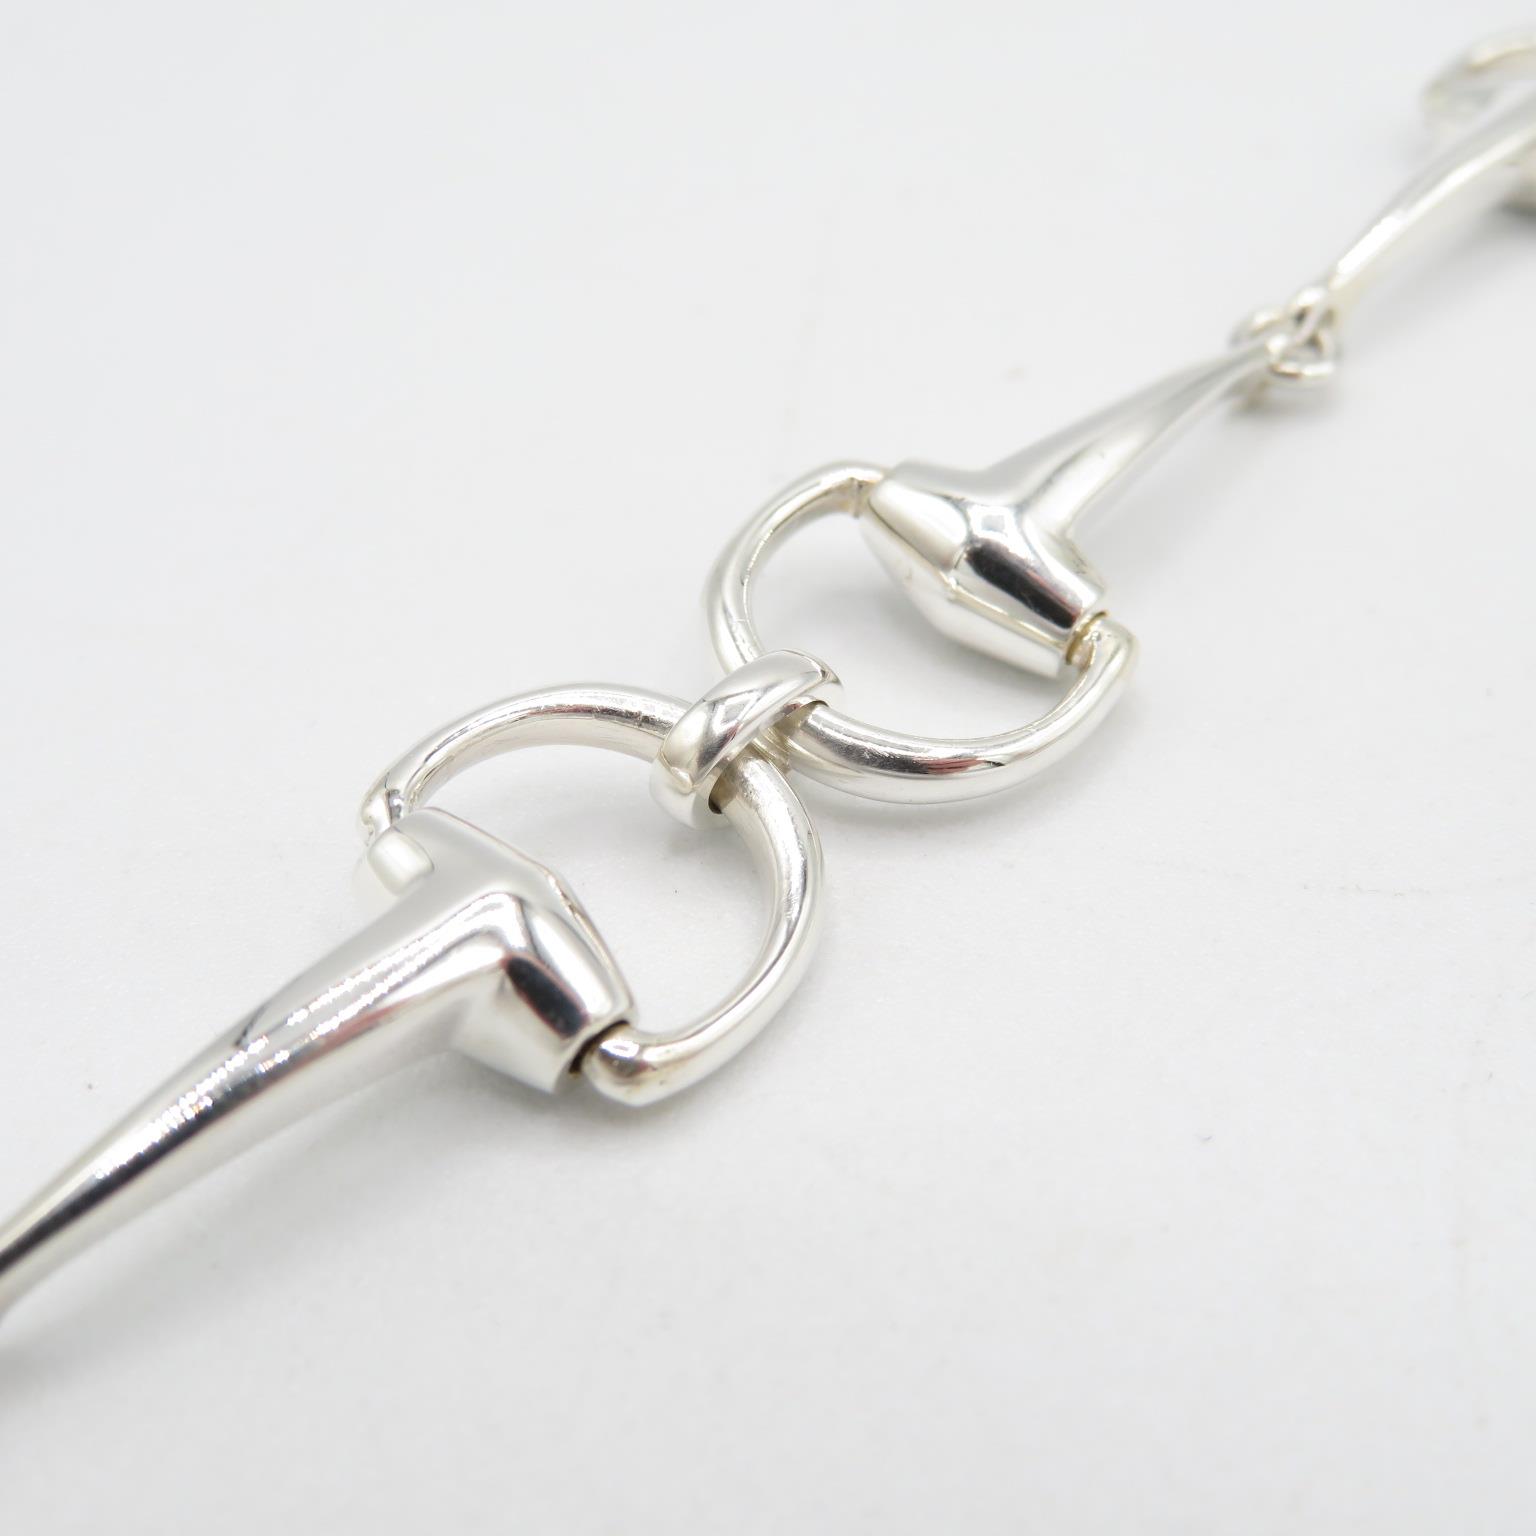 HM 925 Sterling Silver Stirrup Link design necklace in excellent condition (51.5g) length 44cm - Image 2 of 4